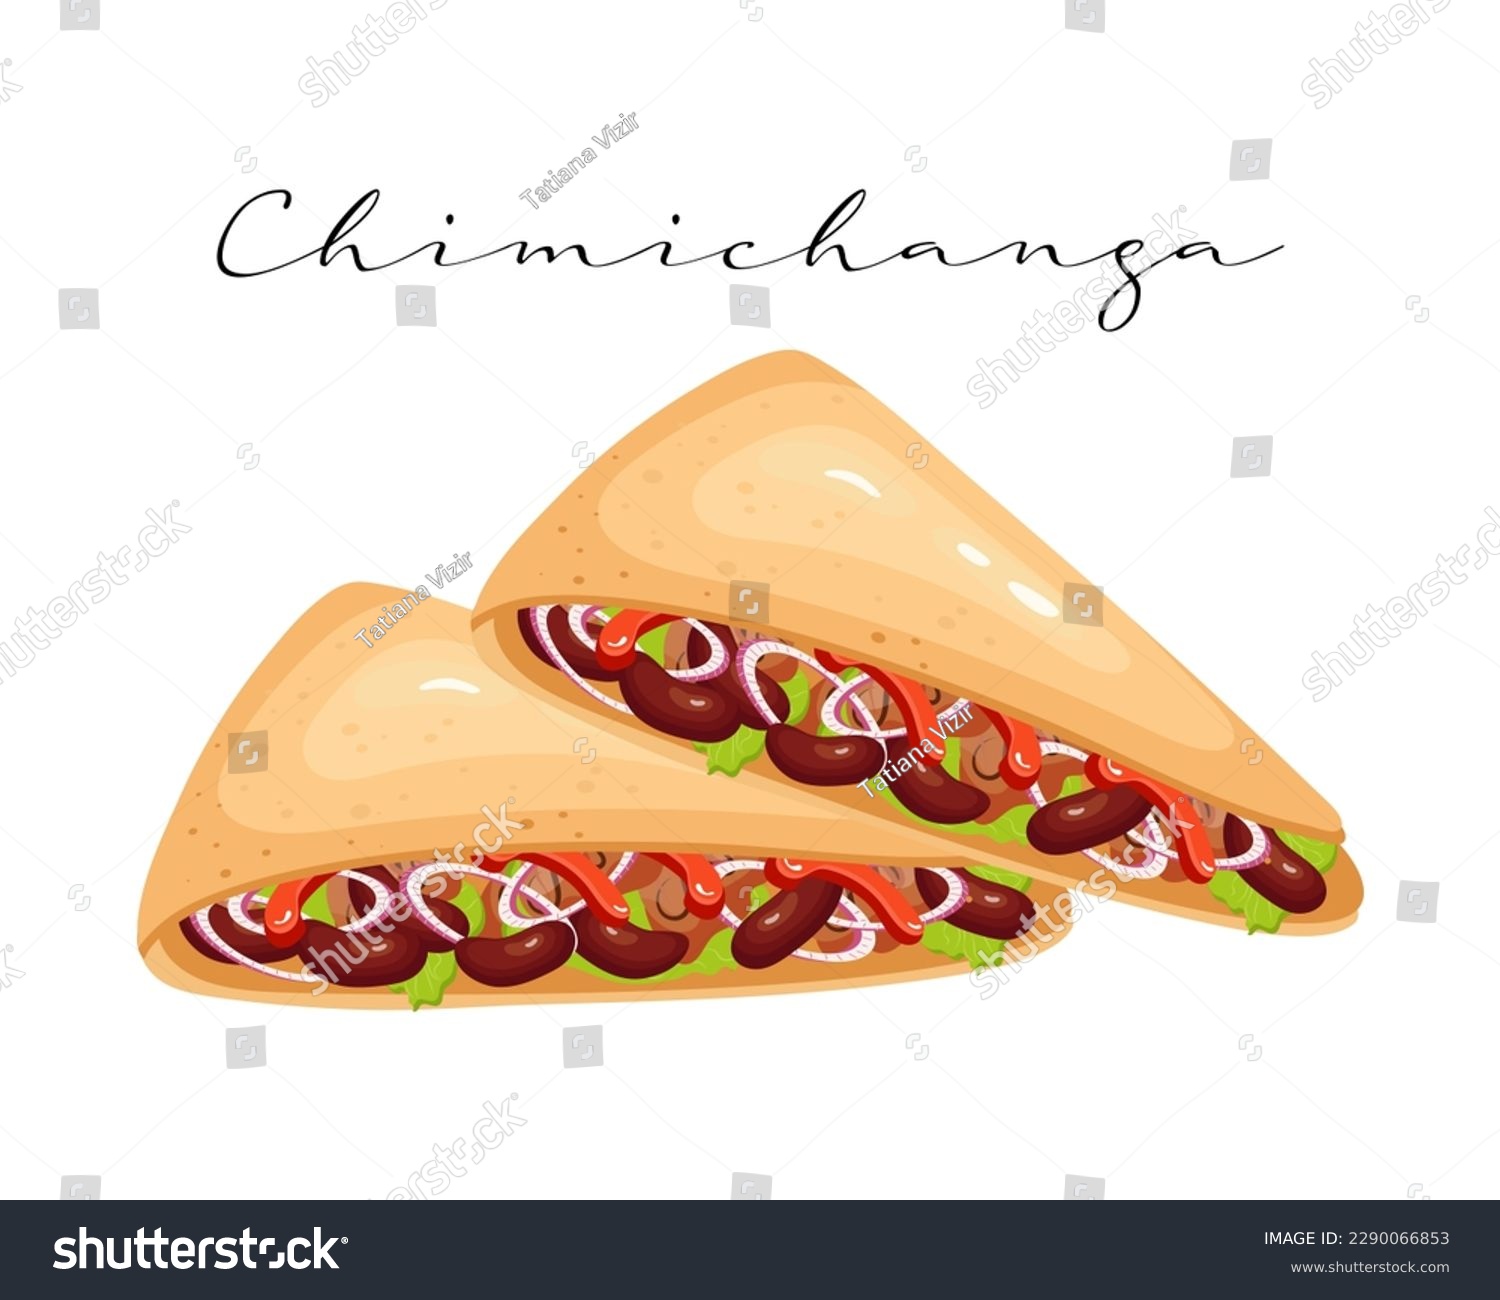 SVG of Flatbread with meat, chili and beans, Chimichanga, Latin American cuisine. National cuisine of Mexico. Food illustration, vector	
 svg